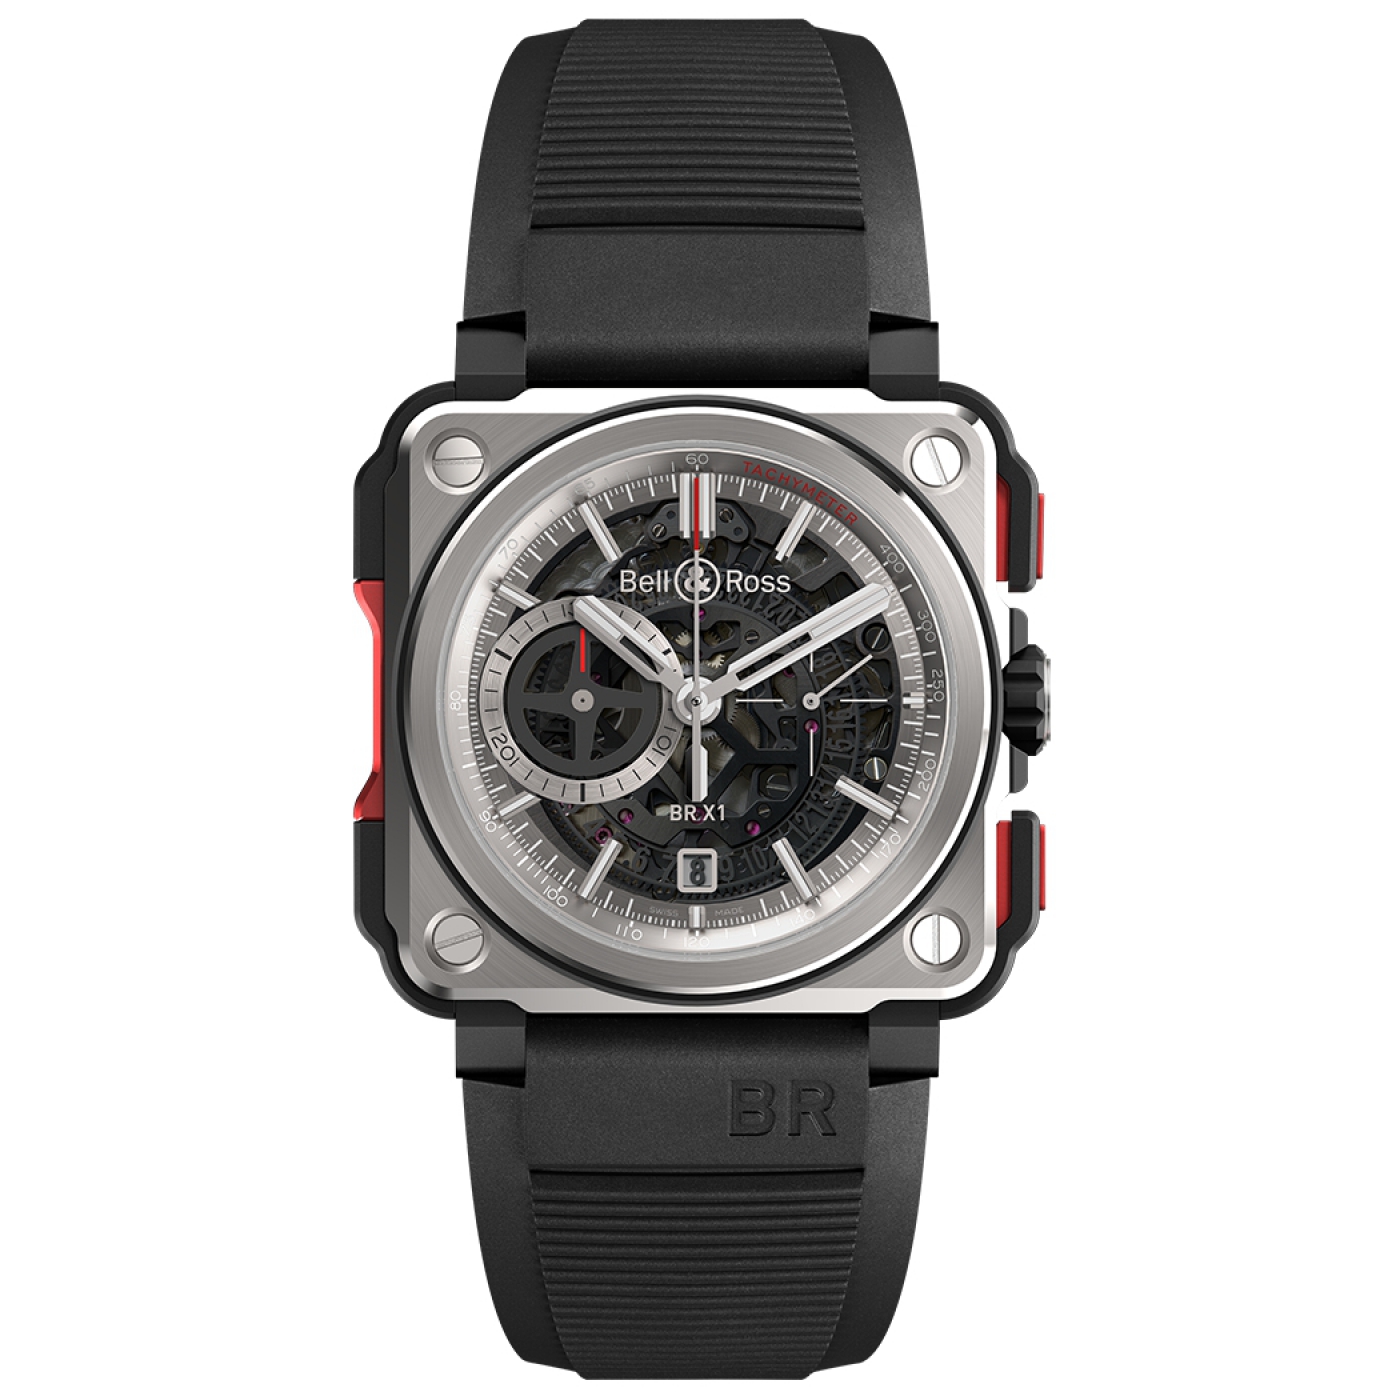 Bell & Ross BRX1-CE-TI-RED